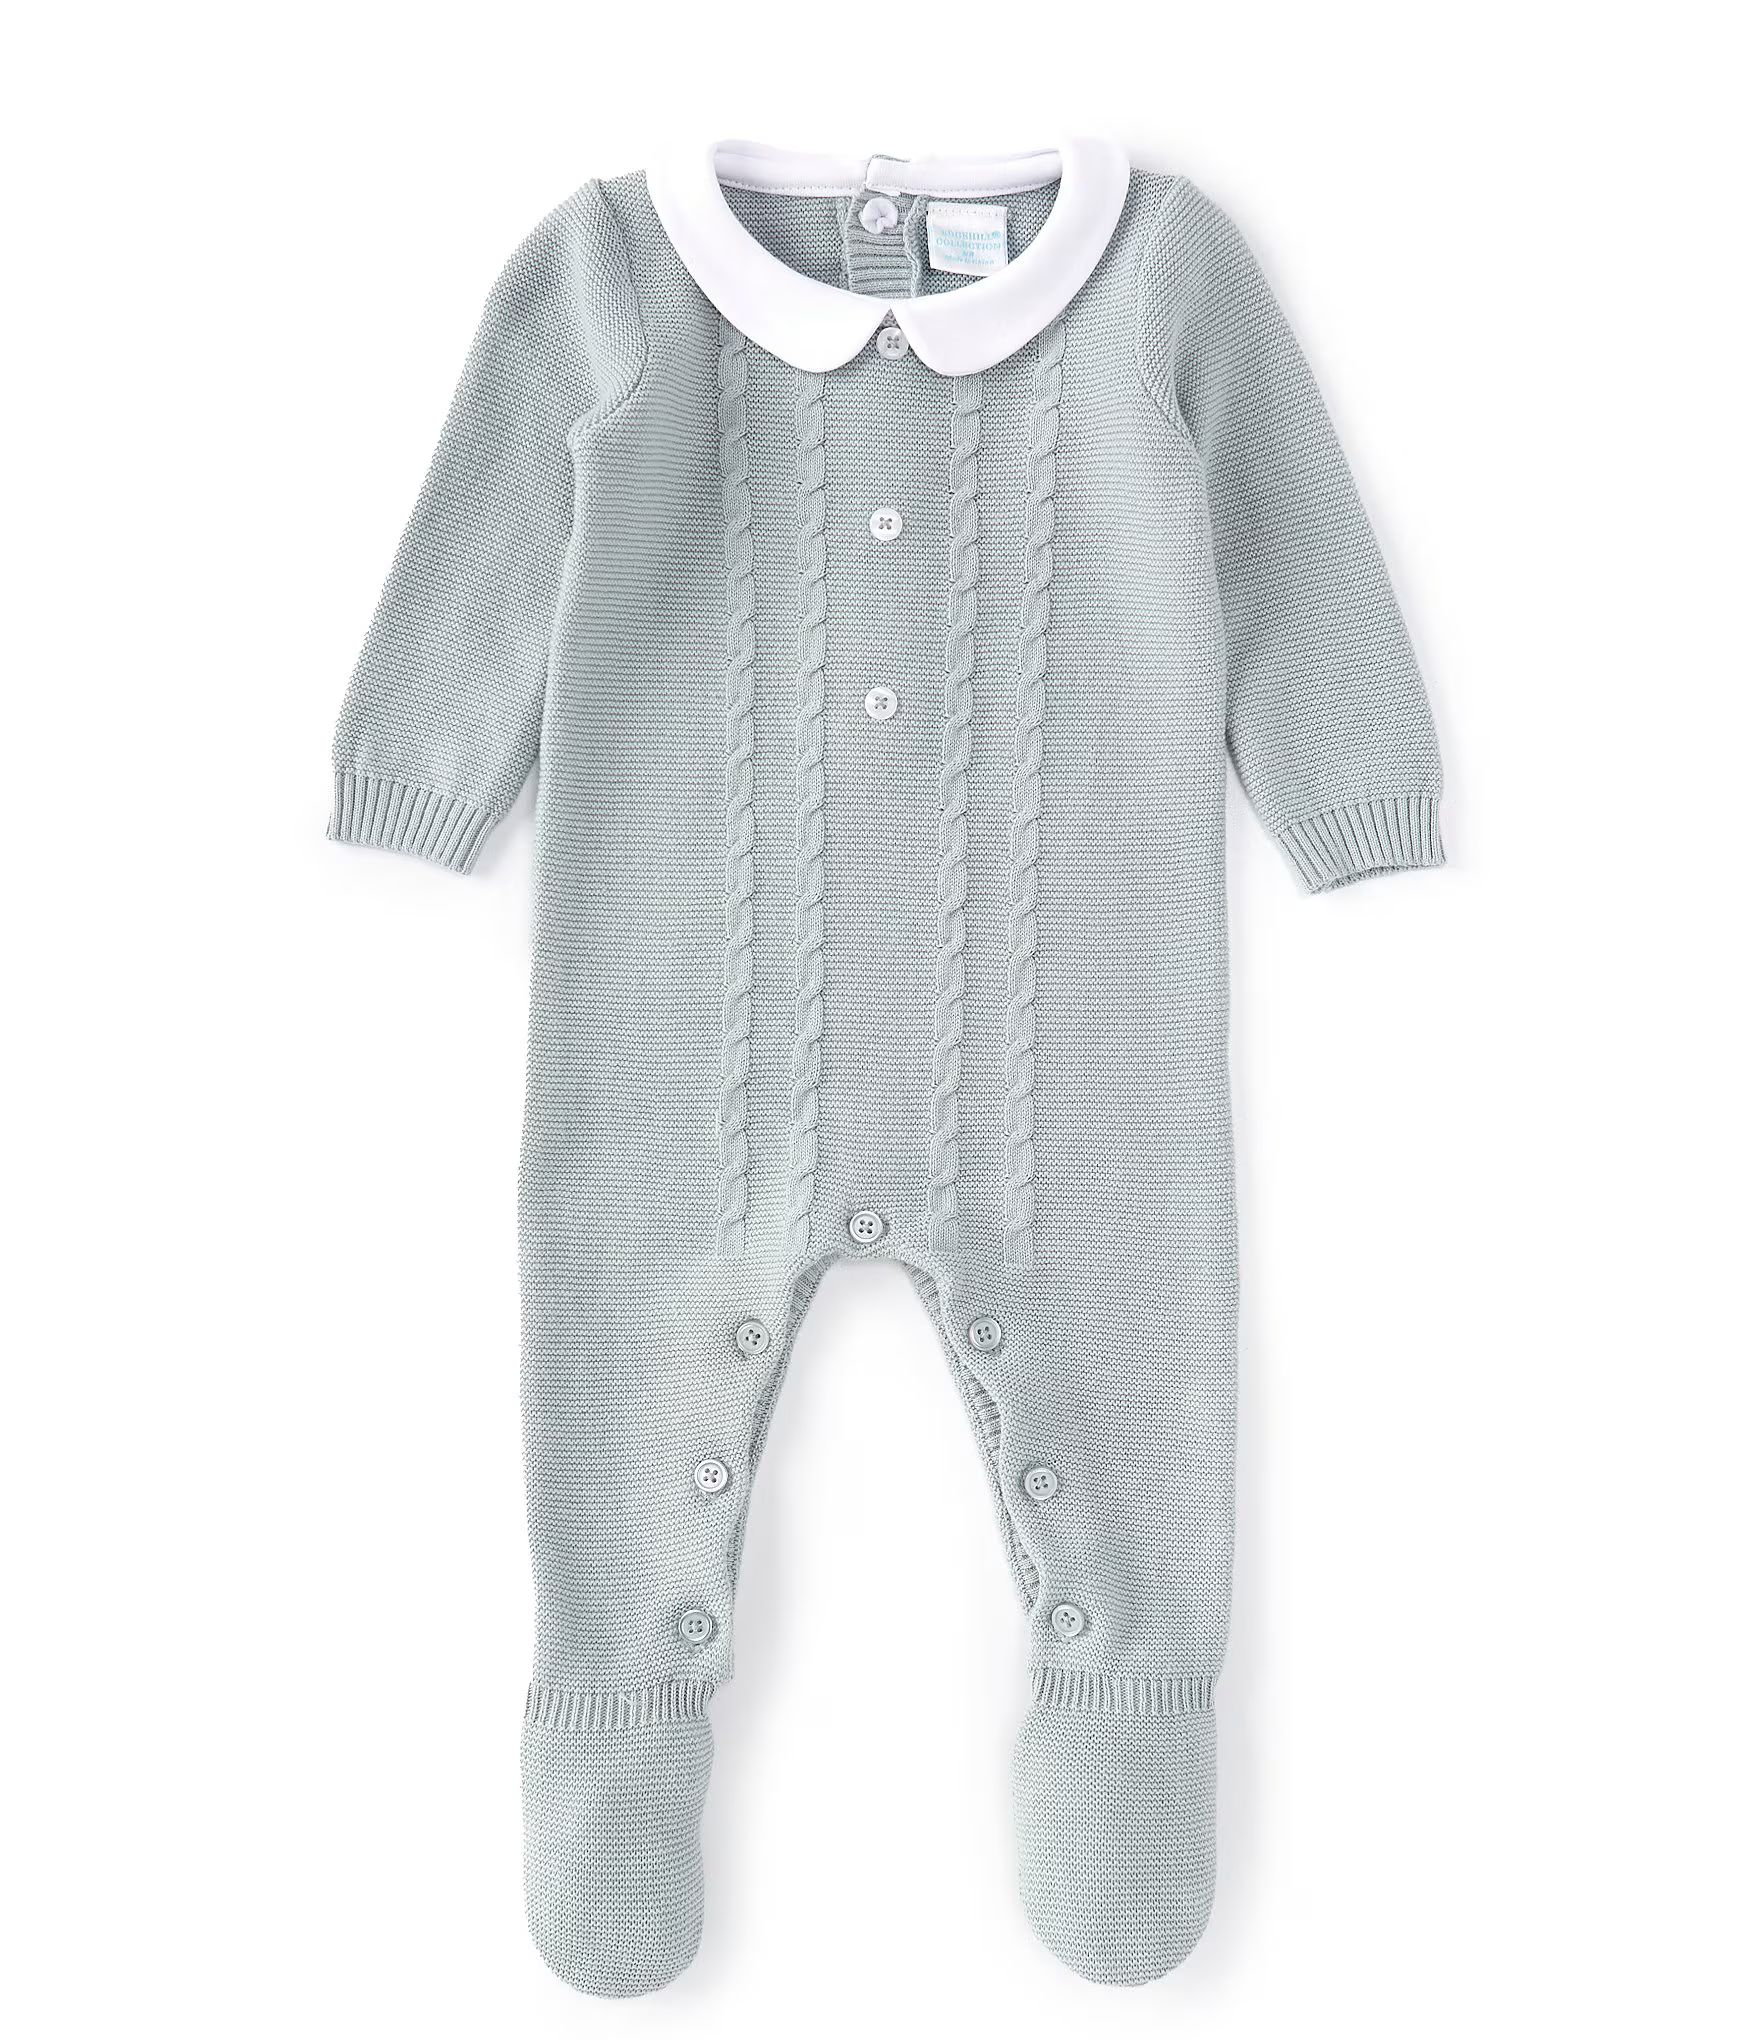 Baby Newborn-6 Months Long Sleeve Sage Sweater knit Round Neck Footed Coverall | Dillard's